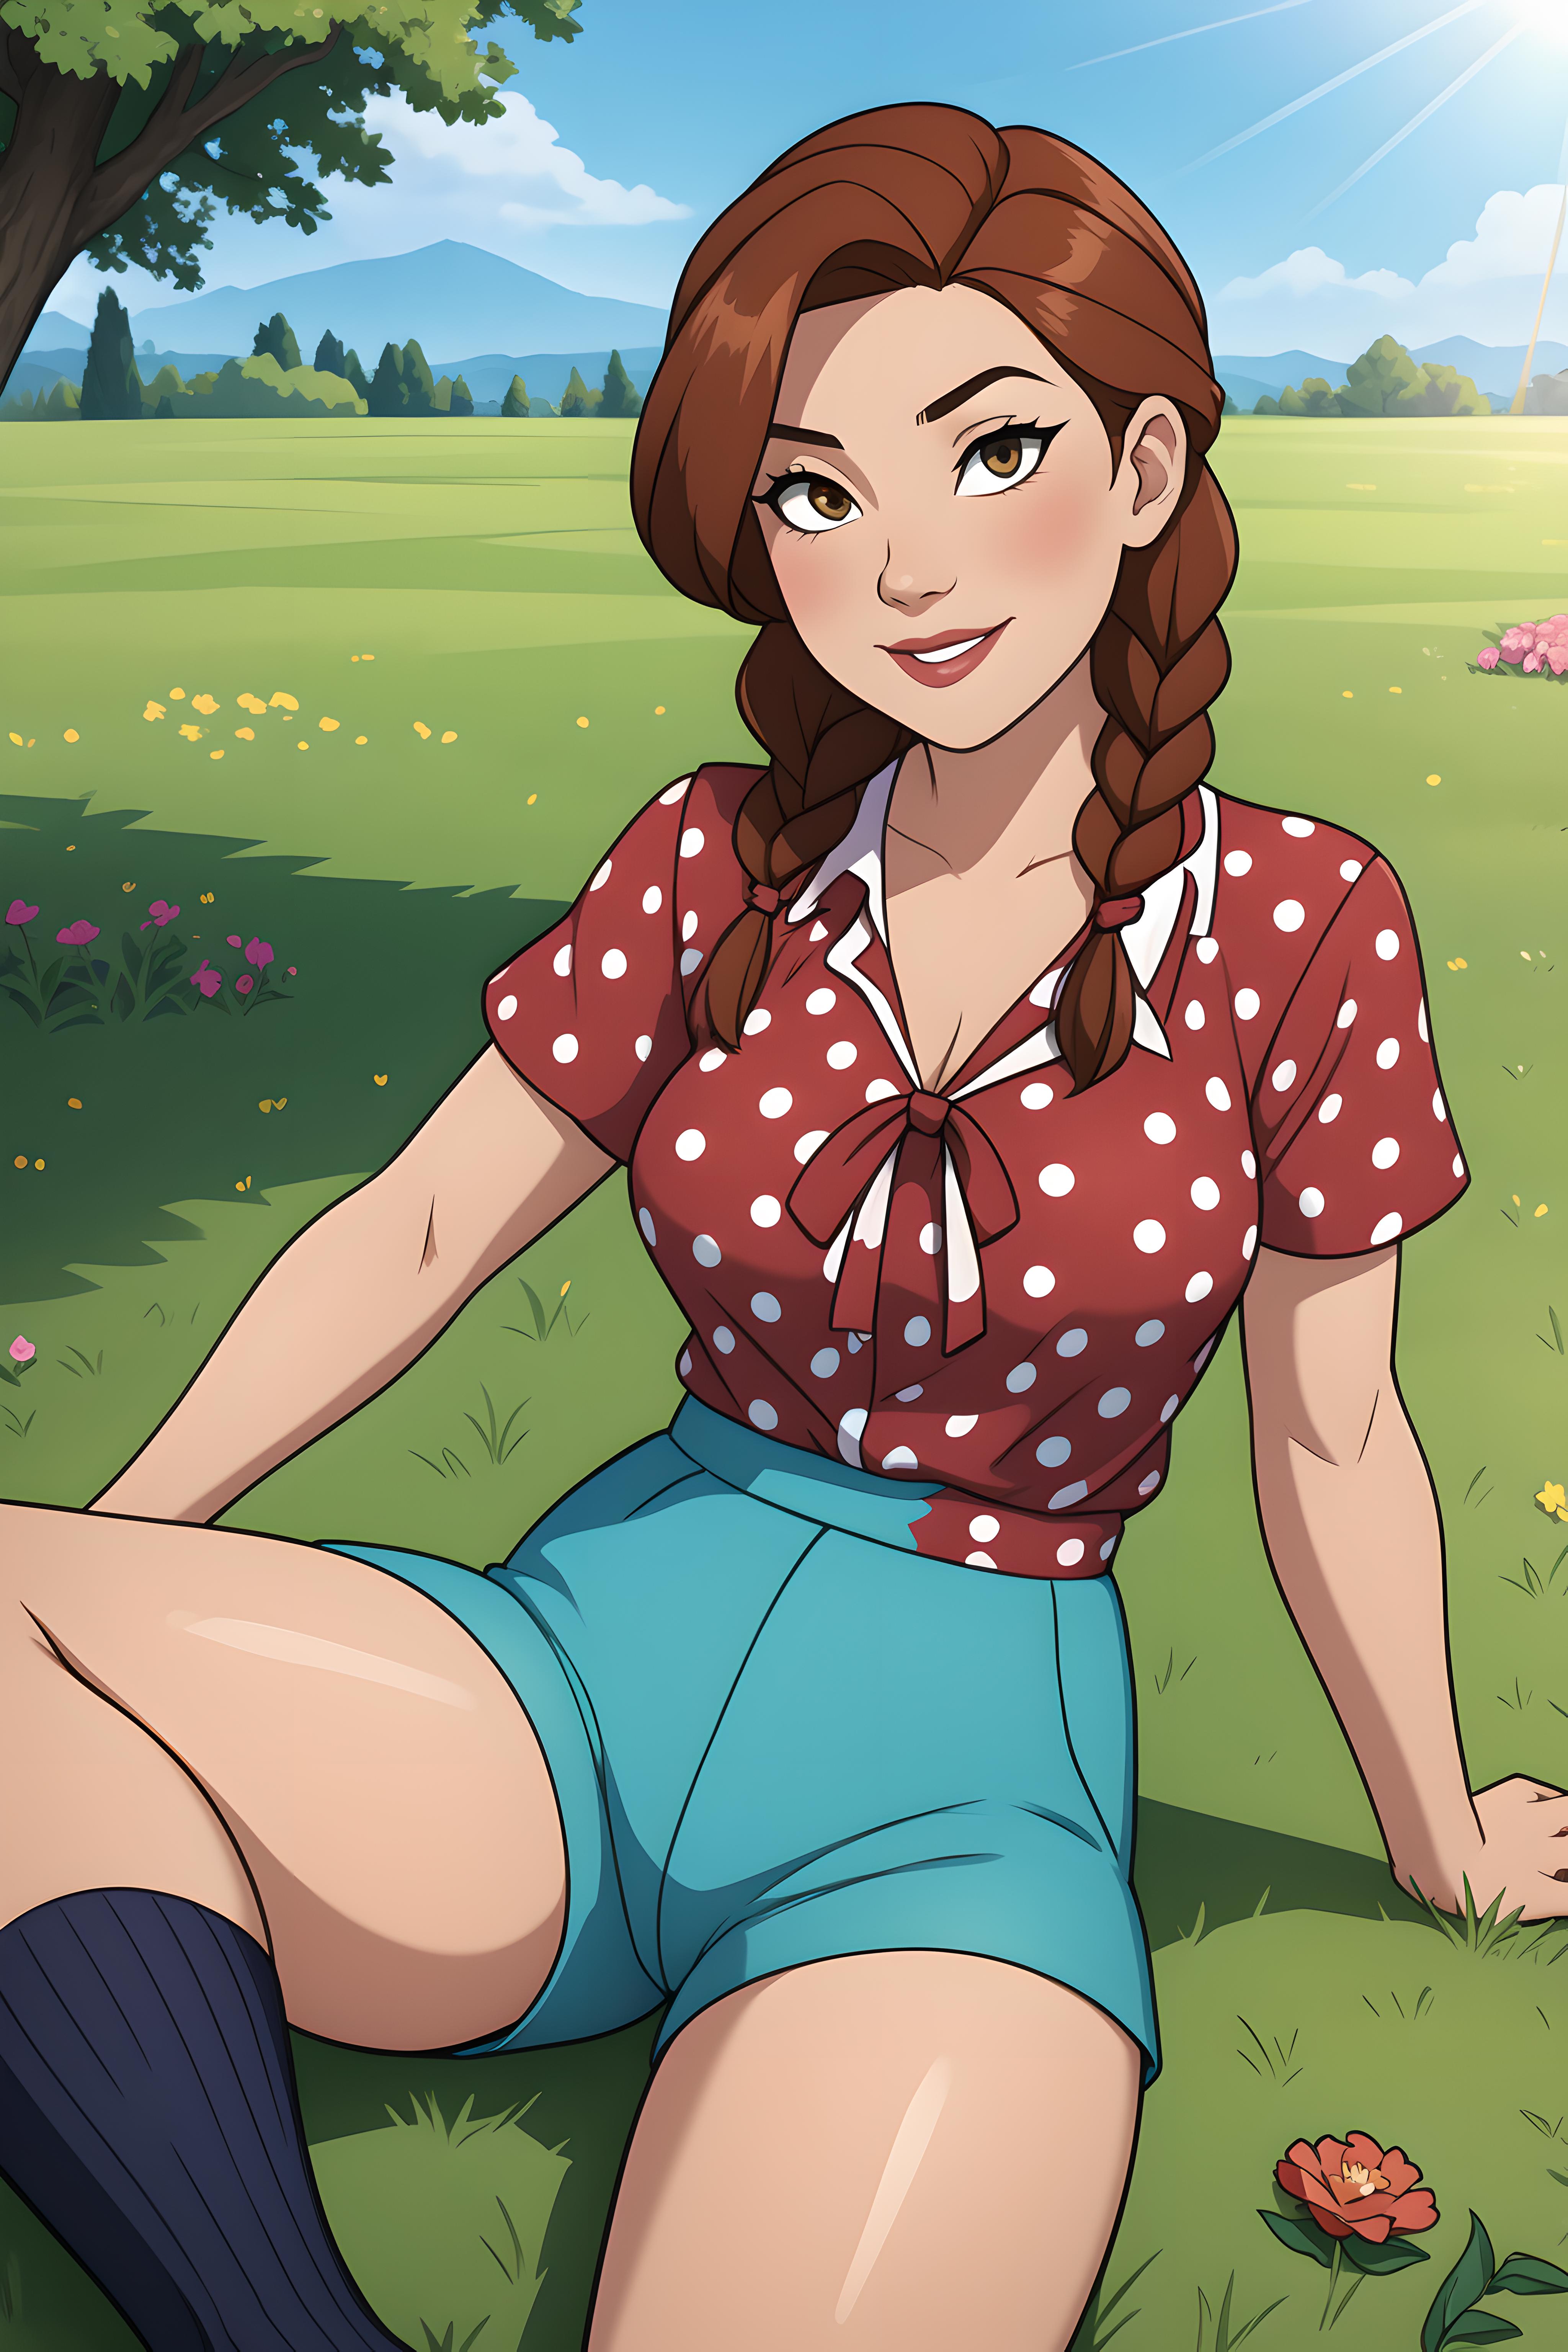 Cartoon Character of a Girl with Polka Dots and Braids Sitting in the Grass.